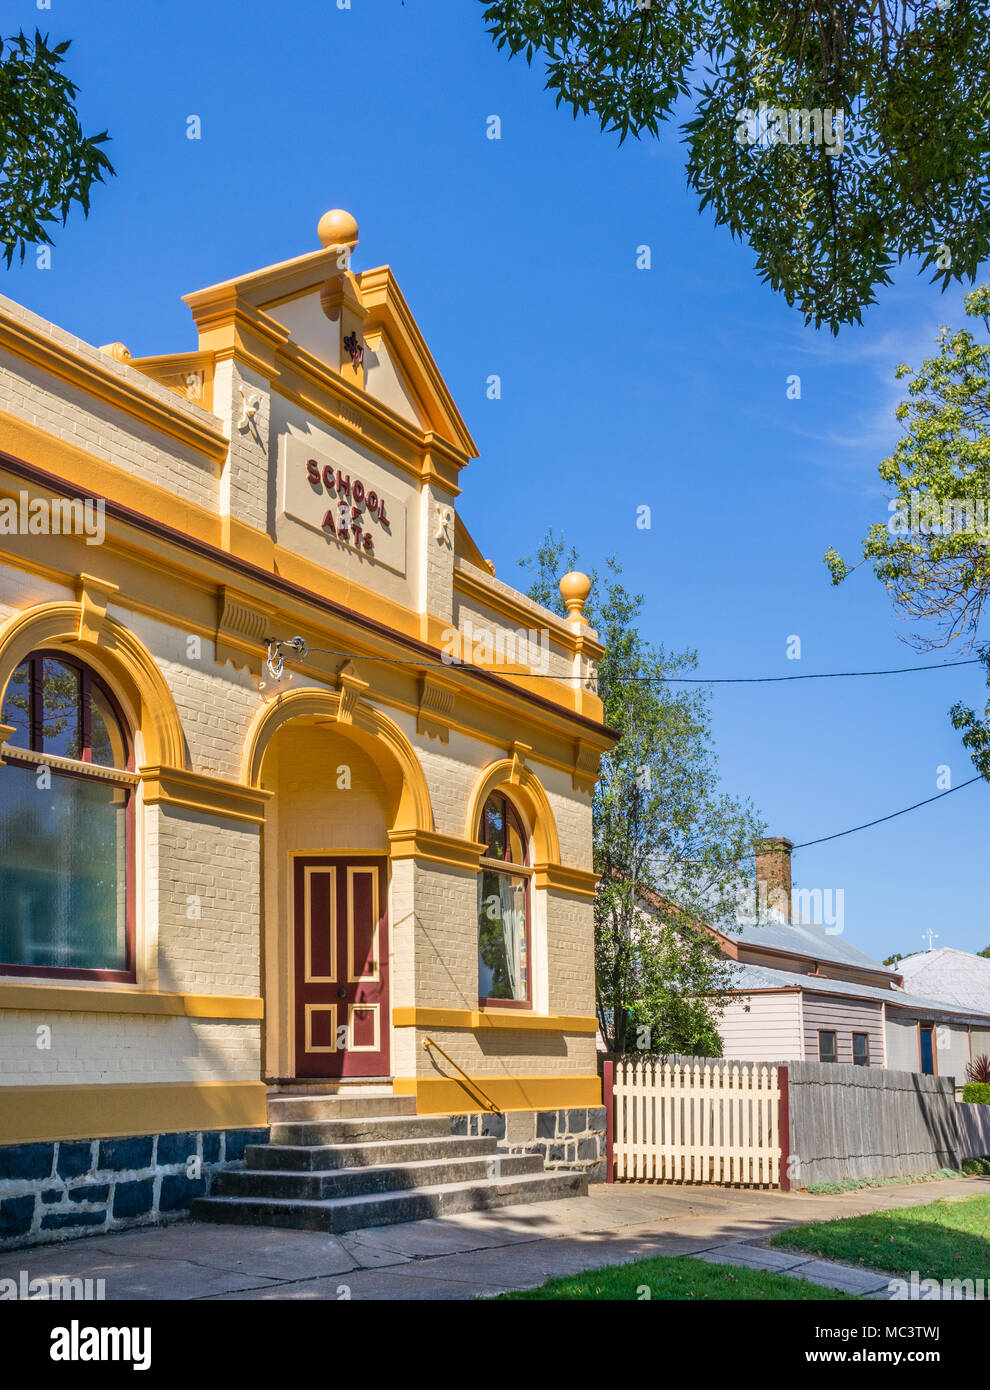 Millthorpe School of Arts heritage building, Central West New South Wales, Australia Stock Photo